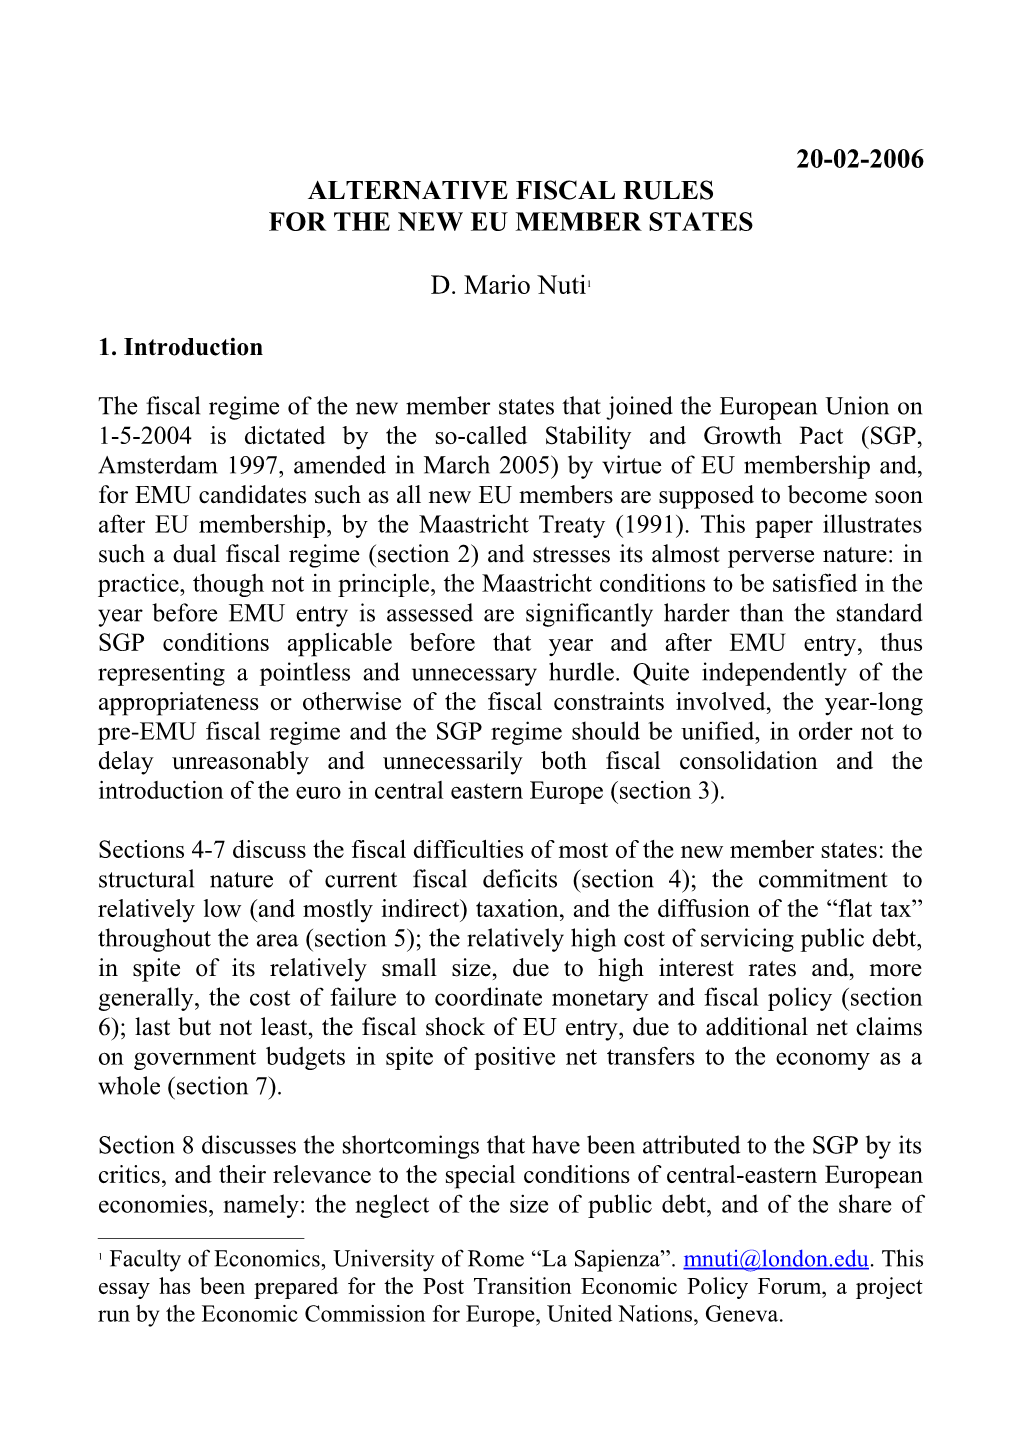 Alternative Fiscal Rules for the New Eu Member States